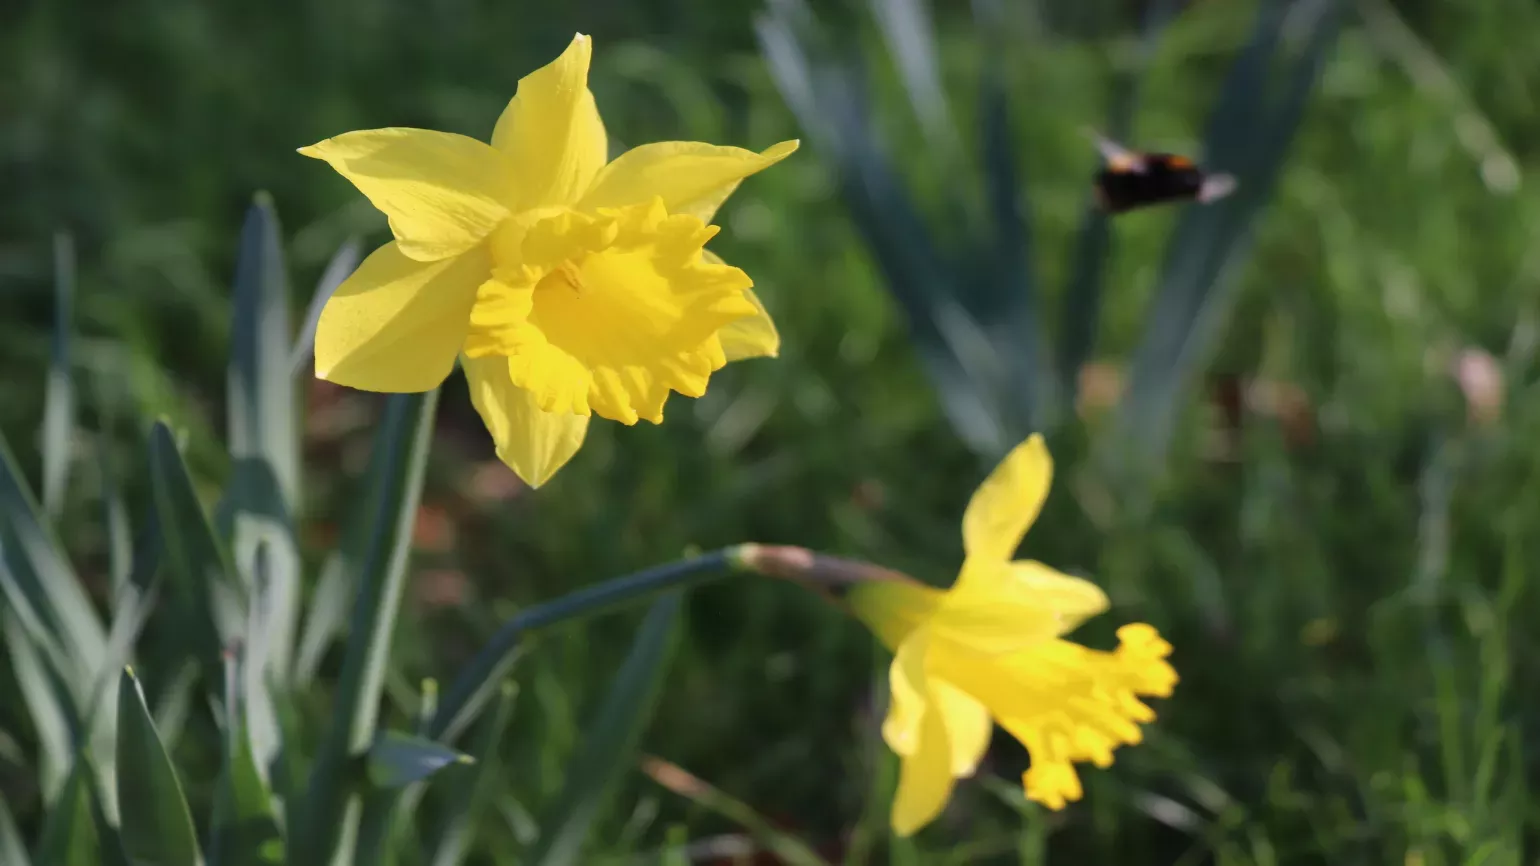 Two yellow daffodils growing in a green field